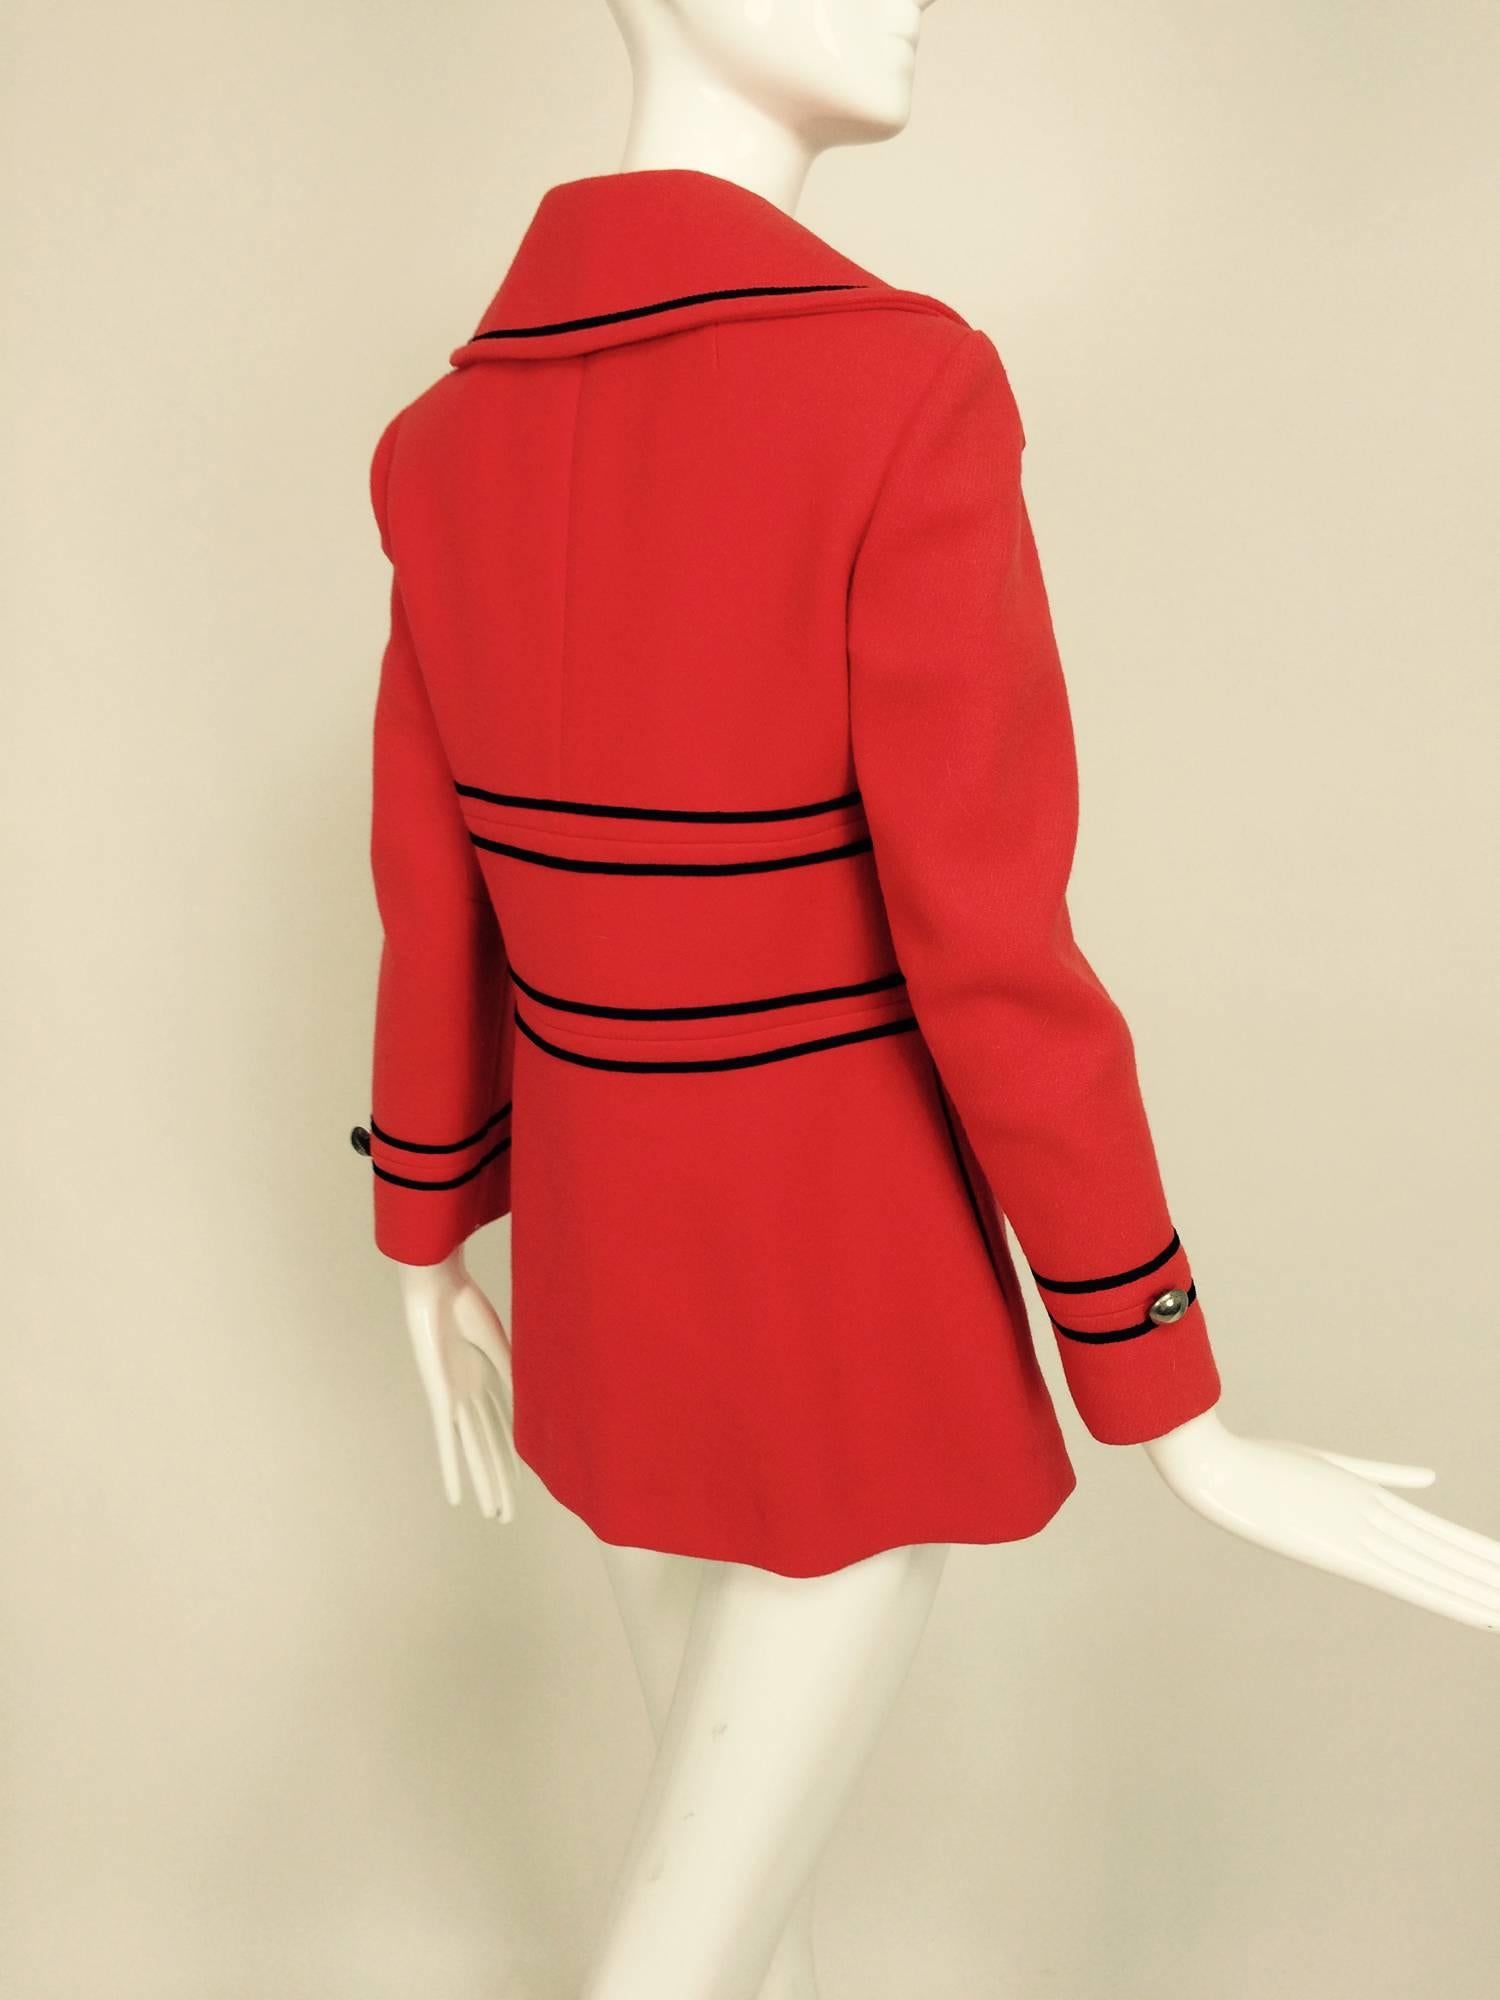 Red Tomato red wool military style pea coat Junior Gallery 1960s